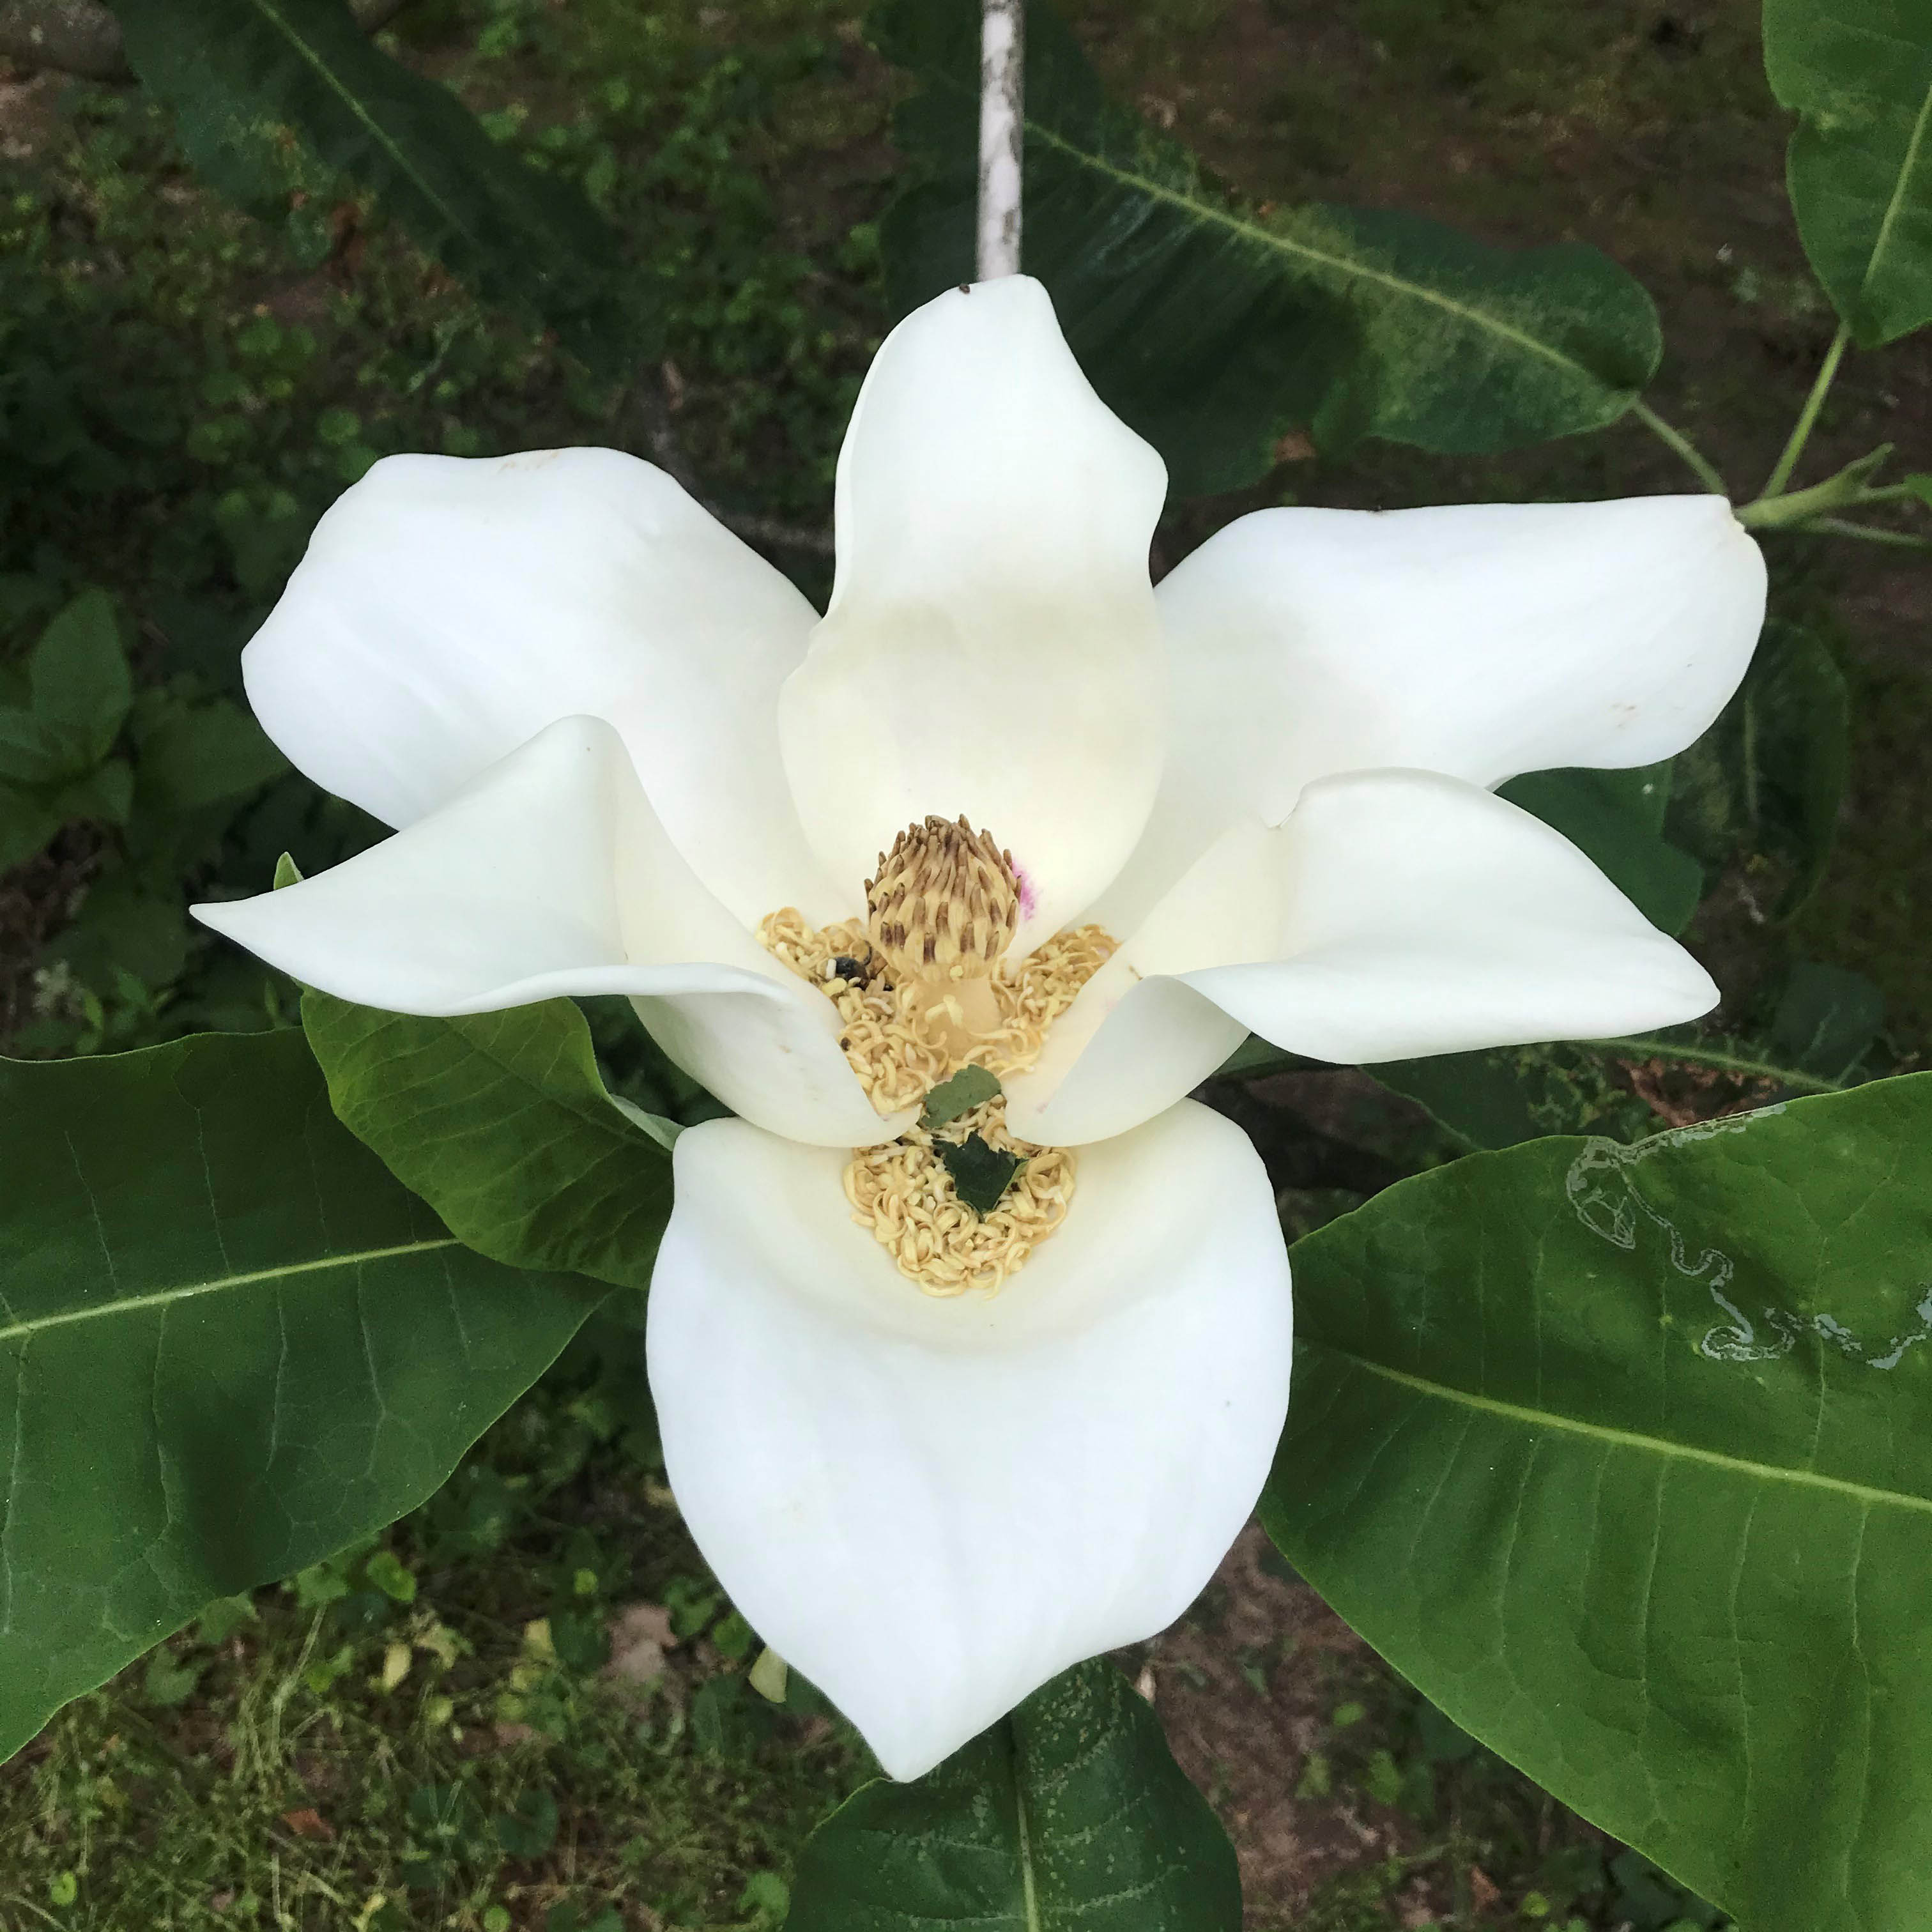 Magnolia macrophylla, one of the trees to be found on the Walk Across Kentucky at The Arboretum. Photo provided by Emily Ellingson